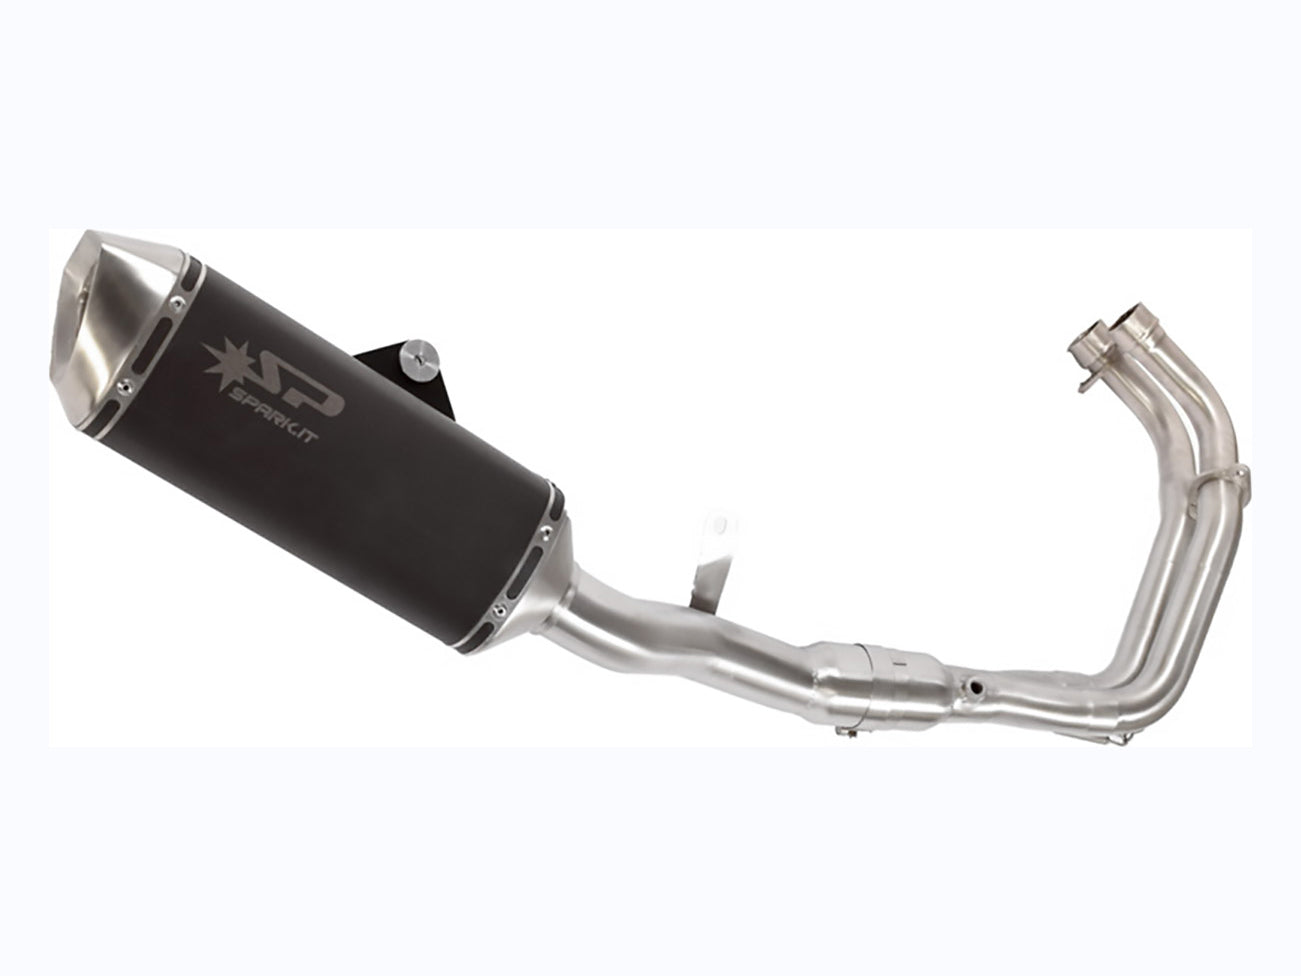 SPARK GYA8821 Yamaha MT-07 Full Exhaust System "Force" (EU homologated; lateral position)